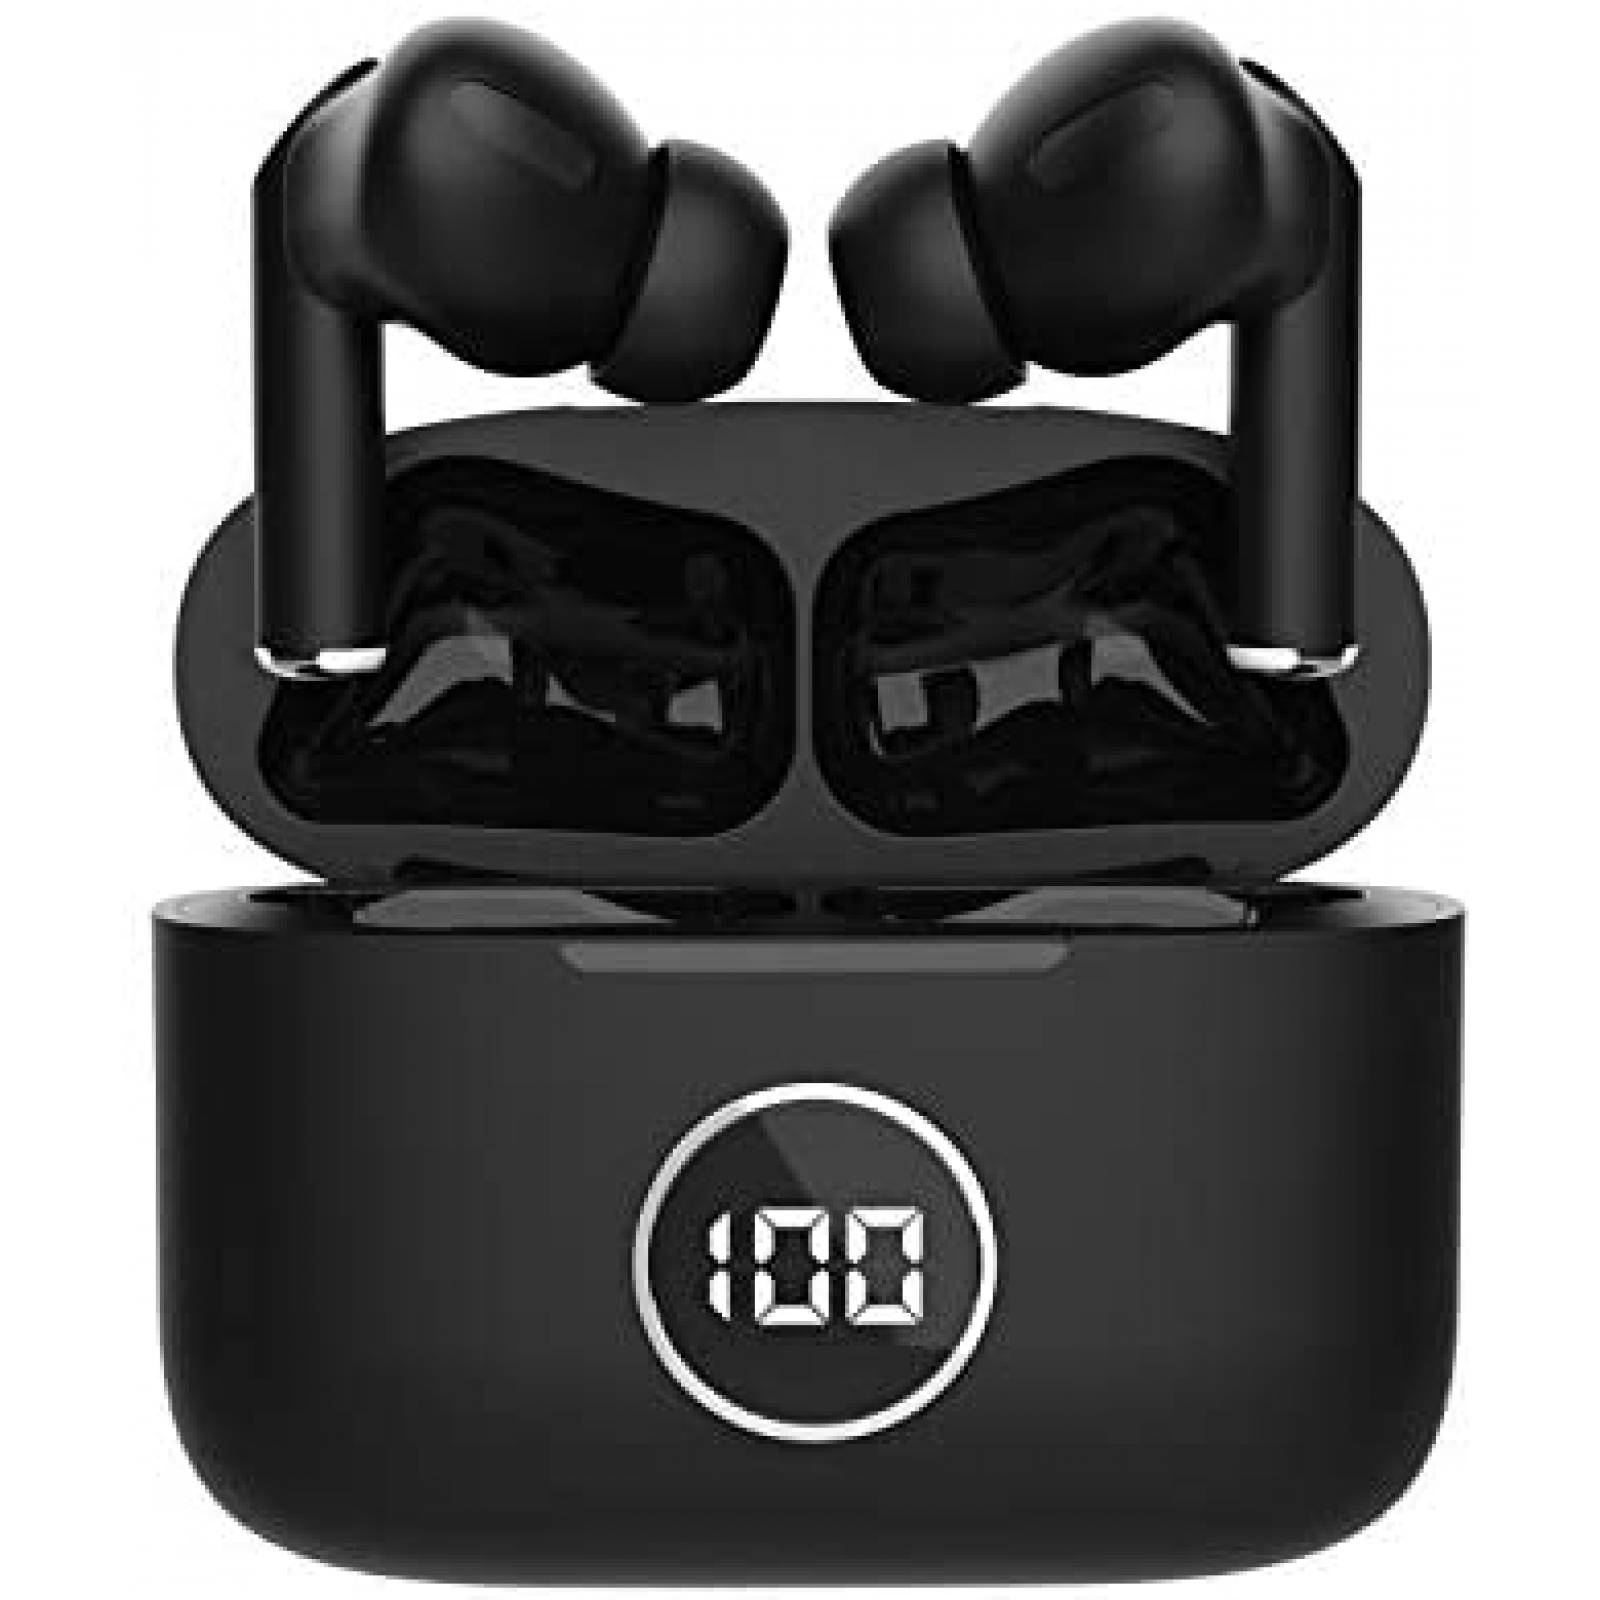 Bose SoundTrue II auriculares over-ear (Android), negros